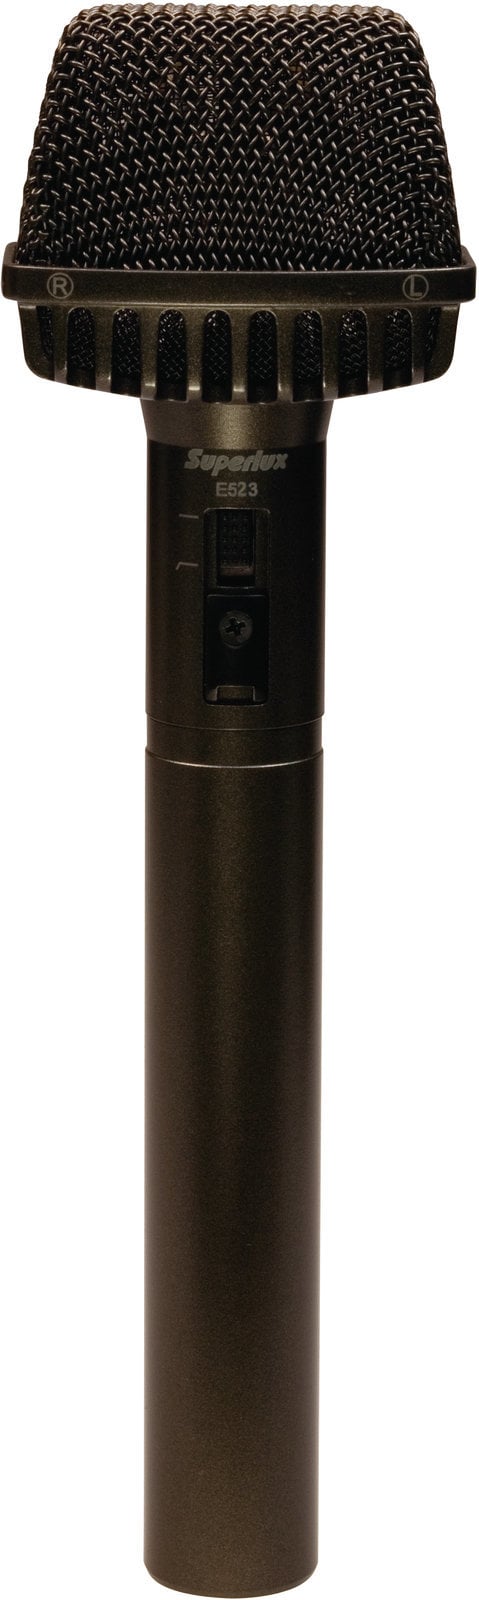 STEREO Microphone Superlux E523D